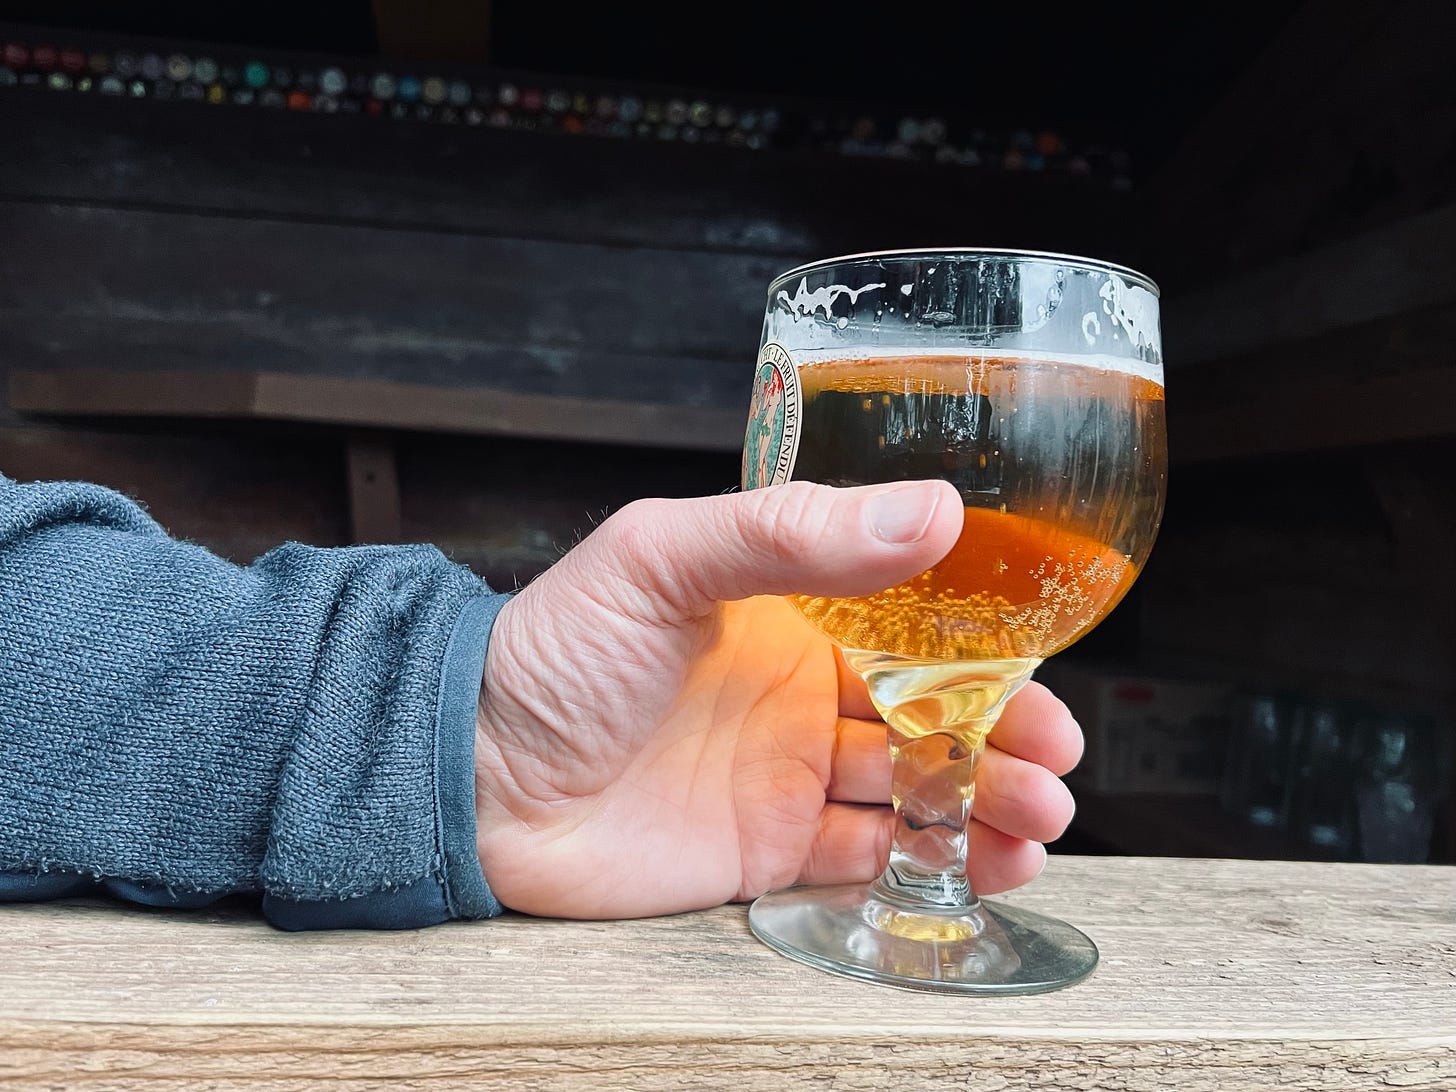 A glass of light ale is held in a hand